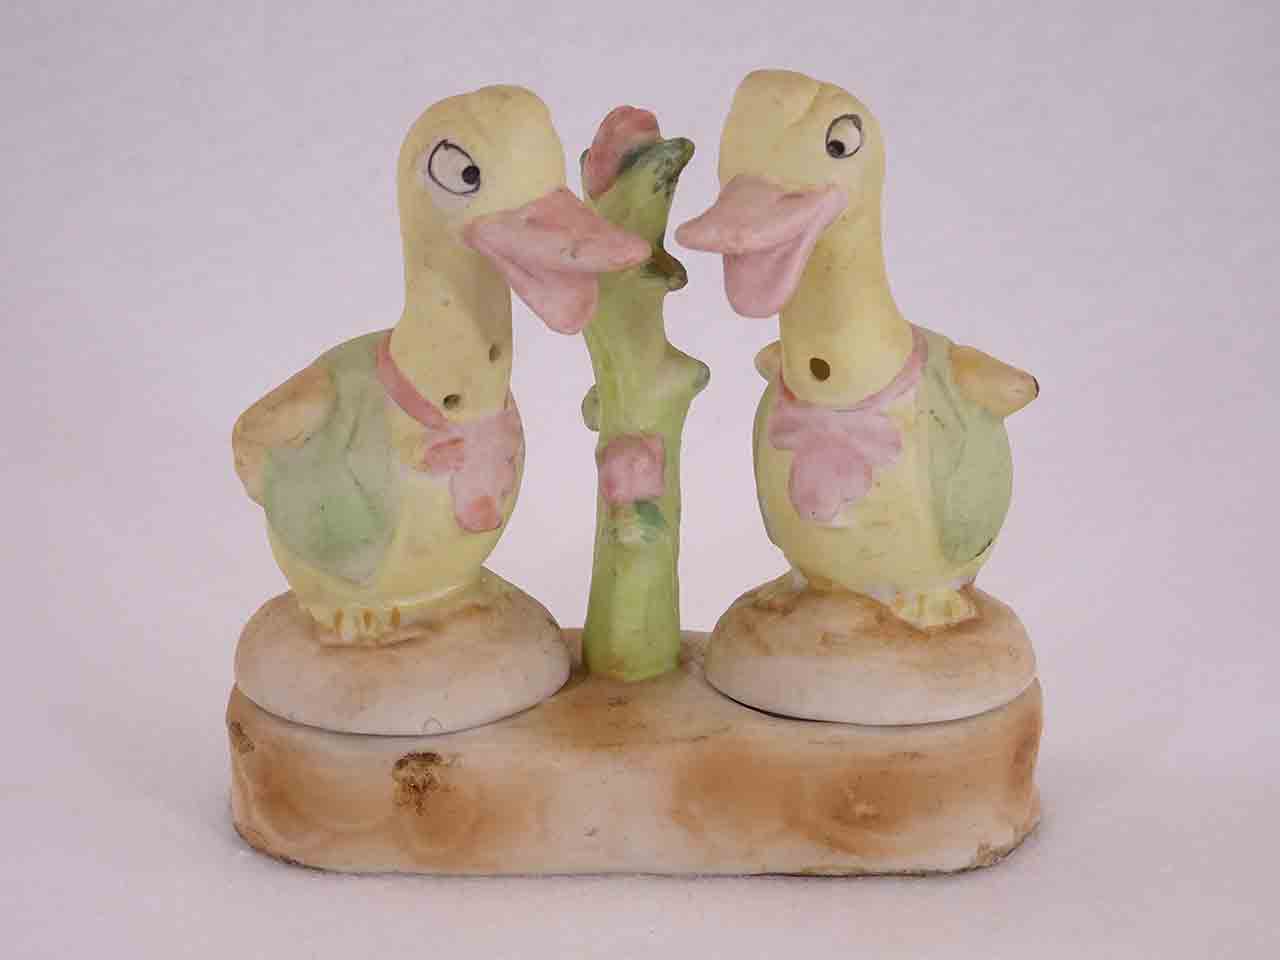 Occupied Japan bisque finished winged animals in bases salt and pepper shakers - ducks